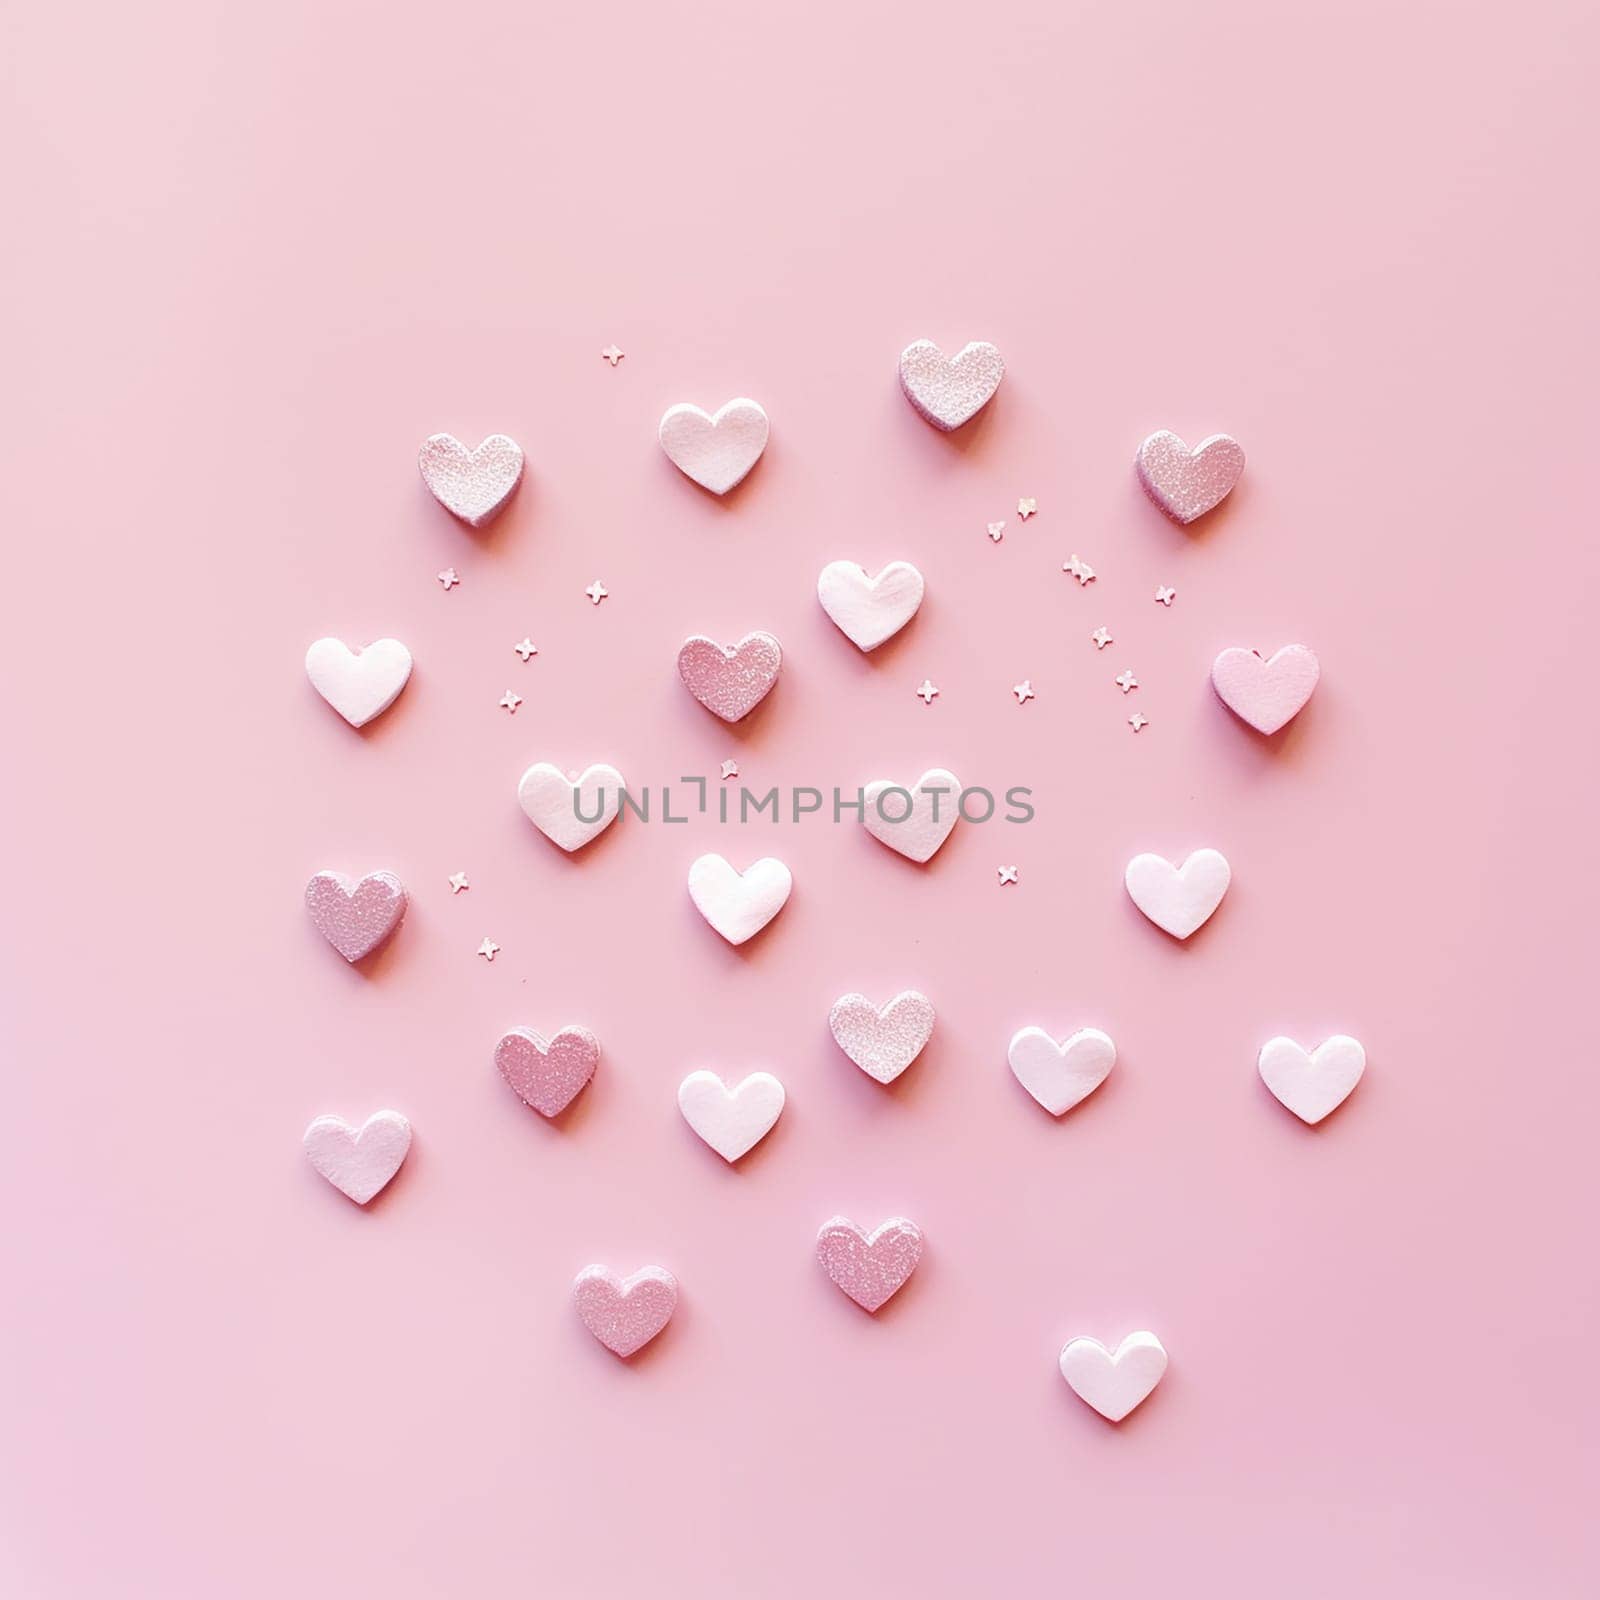 Assorted heart shapes on pink background, representing love, affection, or Valentine's Day. by Hype2art